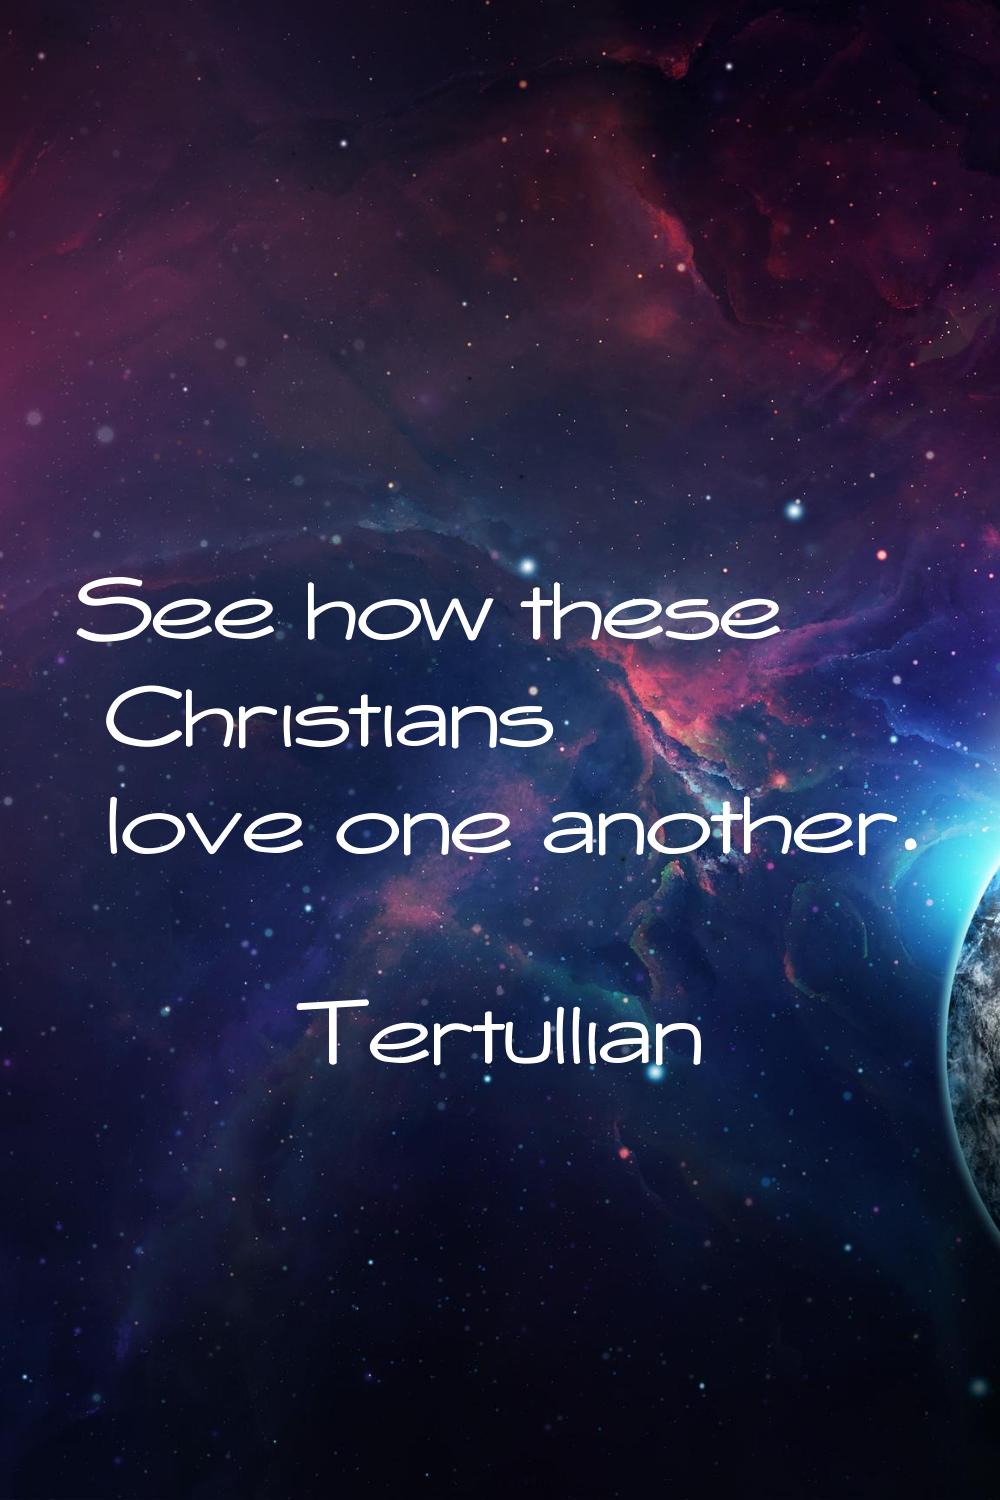 See how these Christians love one another.